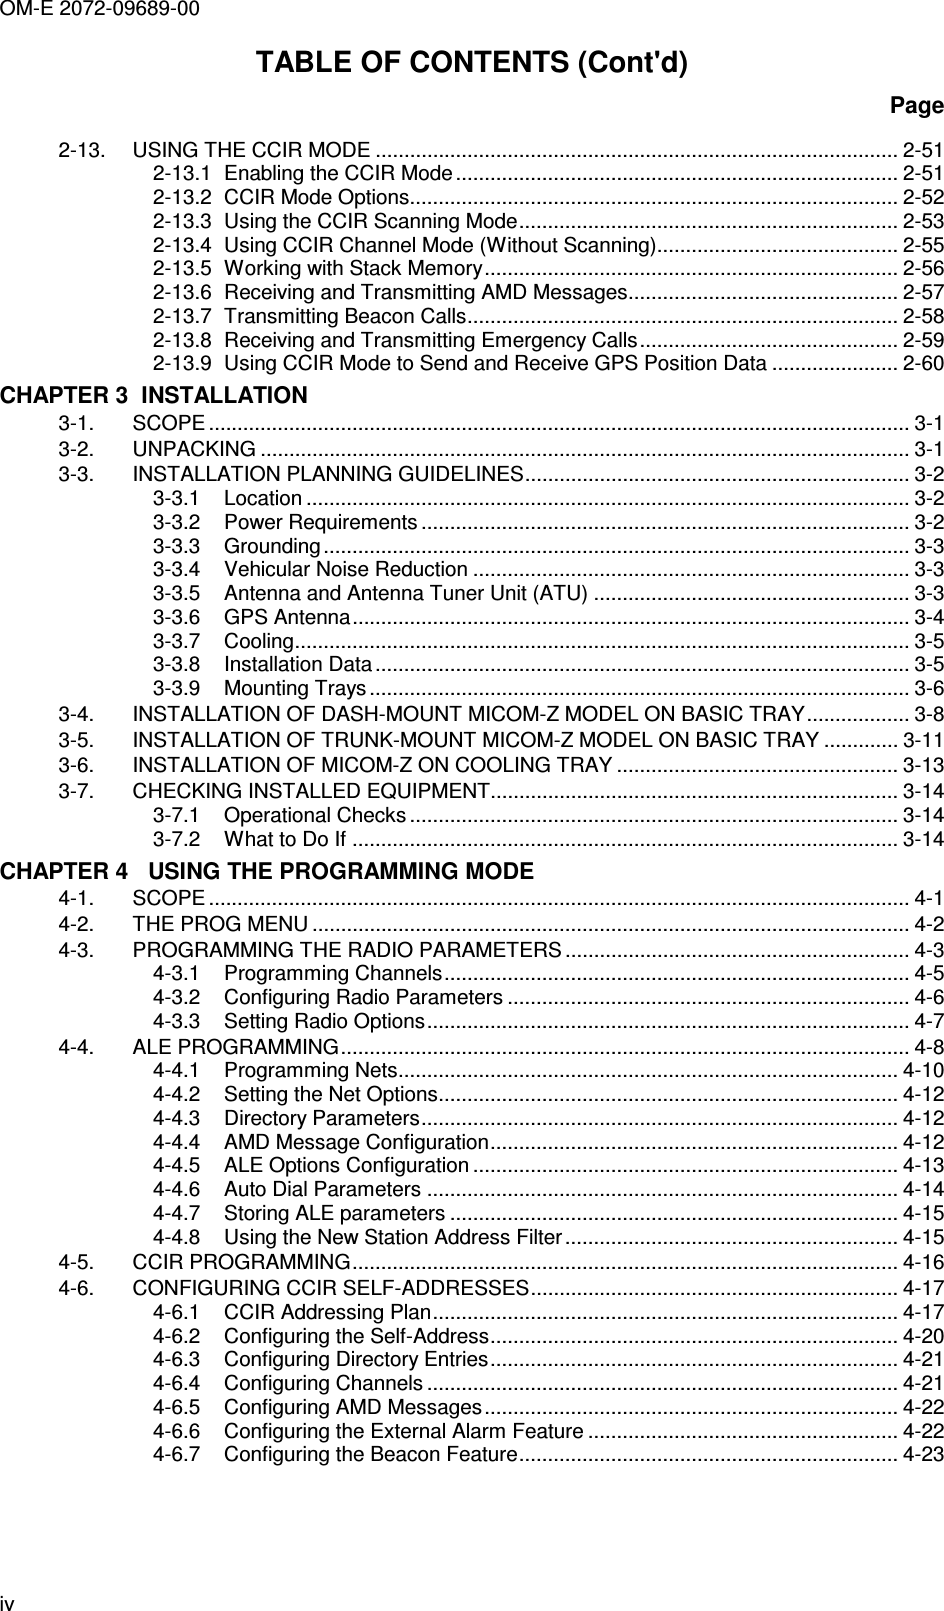 OM-E 2072-09689-00 iv TABLE OF CONTENTS (Cont&apos;d) Page 2-13. USING THE CCIR MODE ........................................................................................... 2-51 2-13.1 Enabling the CCIR Mode ............................................................................. 2-51 2-13.2 CCIR Mode Options..................................................................................... 2-52 2-13.3 Using the CCIR Scanning Mode.................................................................. 2-53 2-13.4 Using CCIR Channel Mode (Without Scanning).......................................... 2-55 2-13.5 Working with Stack Memory........................................................................ 2-56 2-13.6 Receiving and Transmitting AMD Messages............................................... 2-57 2-13.7 Transmitting Beacon Calls........................................................................... 2-58 2-13.8 Receiving and Transmitting Emergency Calls............................................. 2-59 2-13.9 Using CCIR Mode to Send and Receive GPS Position Data ...................... 2-60 CHAPTER 3  INSTALLATION 3-1. SCOPE .......................................................................................................................... 3-1 3-2. UNPACKING ................................................................................................................. 3-1 3-3. INSTALLATION PLANNING GUIDELINES................................................................... 3-2 3-3.1 Location ......................................................................................................... 3-2 3-3.2 Power Requirements ..................................................................................... 3-2 3-3.3 Grounding...................................................................................................... 3-3 3-3.4 Vehicular Noise Reduction ............................................................................ 3-3 3-3.5 Antenna and Antenna Tuner Unit (ATU) ....................................................... 3-3 3-3.6 GPS Antenna................................................................................................. 3-4 3-3.7 Cooling........................................................................................................... 3-5 3-3.8 Installation Data ............................................................................................. 3-5 3-3.9 Mounting Trays .............................................................................................. 3-6 3-4. INSTALLATION OF DASH-MOUNT MICOM-Z MODEL ON BASIC TRAY.................. 3-8 3-5. INSTALLATION OF TRUNK-MOUNT MICOM-Z MODEL ON BASIC TRAY ............. 3-11 3-6. INSTALLATION OF MICOM-Z ON COOLING TRAY ................................................. 3-13 3-7. CHECKING INSTALLED EQUIPMENT....................................................................... 3-14 3-7.1 Operational Checks ..................................................................................... 3-14 3-7.2 What to Do If ............................................................................................... 3-14 CHAPTER 4   USING THE PROGRAMMING MODE 4-1. SCOPE .......................................................................................................................... 4-1 4-2. THE PROG MENU ........................................................................................................ 4-2 4-3. PROGRAMMING THE RADIO PARAMETERS ............................................................ 4-3 4-3.1 Programming Channels................................................................................. 4-5 4-3.2 Configuring Radio Parameters ...................................................................... 4-6 4-3.3 Setting Radio Options.................................................................................... 4-7 4-4. ALE PROGRAMMING................................................................................................... 4-8 4-4.1 Programming Nets....................................................................................... 4-10 4-4.2 Setting the Net Options................................................................................ 4-12 4-4.3 Directory Parameters................................................................................... 4-12 4-4.4 AMD Message Configuration....................................................................... 4-12 4-4.5 ALE Options Configuration .......................................................................... 4-13 4-4.6 Auto Dial Parameters .................................................................................. 4-14 4-4.7 Storing ALE parameters .............................................................................. 4-15 4-4.8 Using the New Station Address Filter.......................................................... 4-15 4-5. CCIR PROGRAMMING............................................................................................... 4-16 4-6. CONFIGURING CCIR SELF-ADDRESSES................................................................ 4-17 4-6.1 CCIR Addressing Plan................................................................................. 4-17 4-6.2 Configuring the Self-Address....................................................................... 4-20 4-6.3 Configuring Directory Entries....................................................................... 4-21 4-6.4 Configuring Channels .................................................................................. 4-21 4-6.5 Configuring AMD Messages........................................................................ 4-22 4-6.6 Configuring the External Alarm Feature ...................................................... 4-22 4-6.7 Configuring the Beacon Feature.................................................................. 4-23 